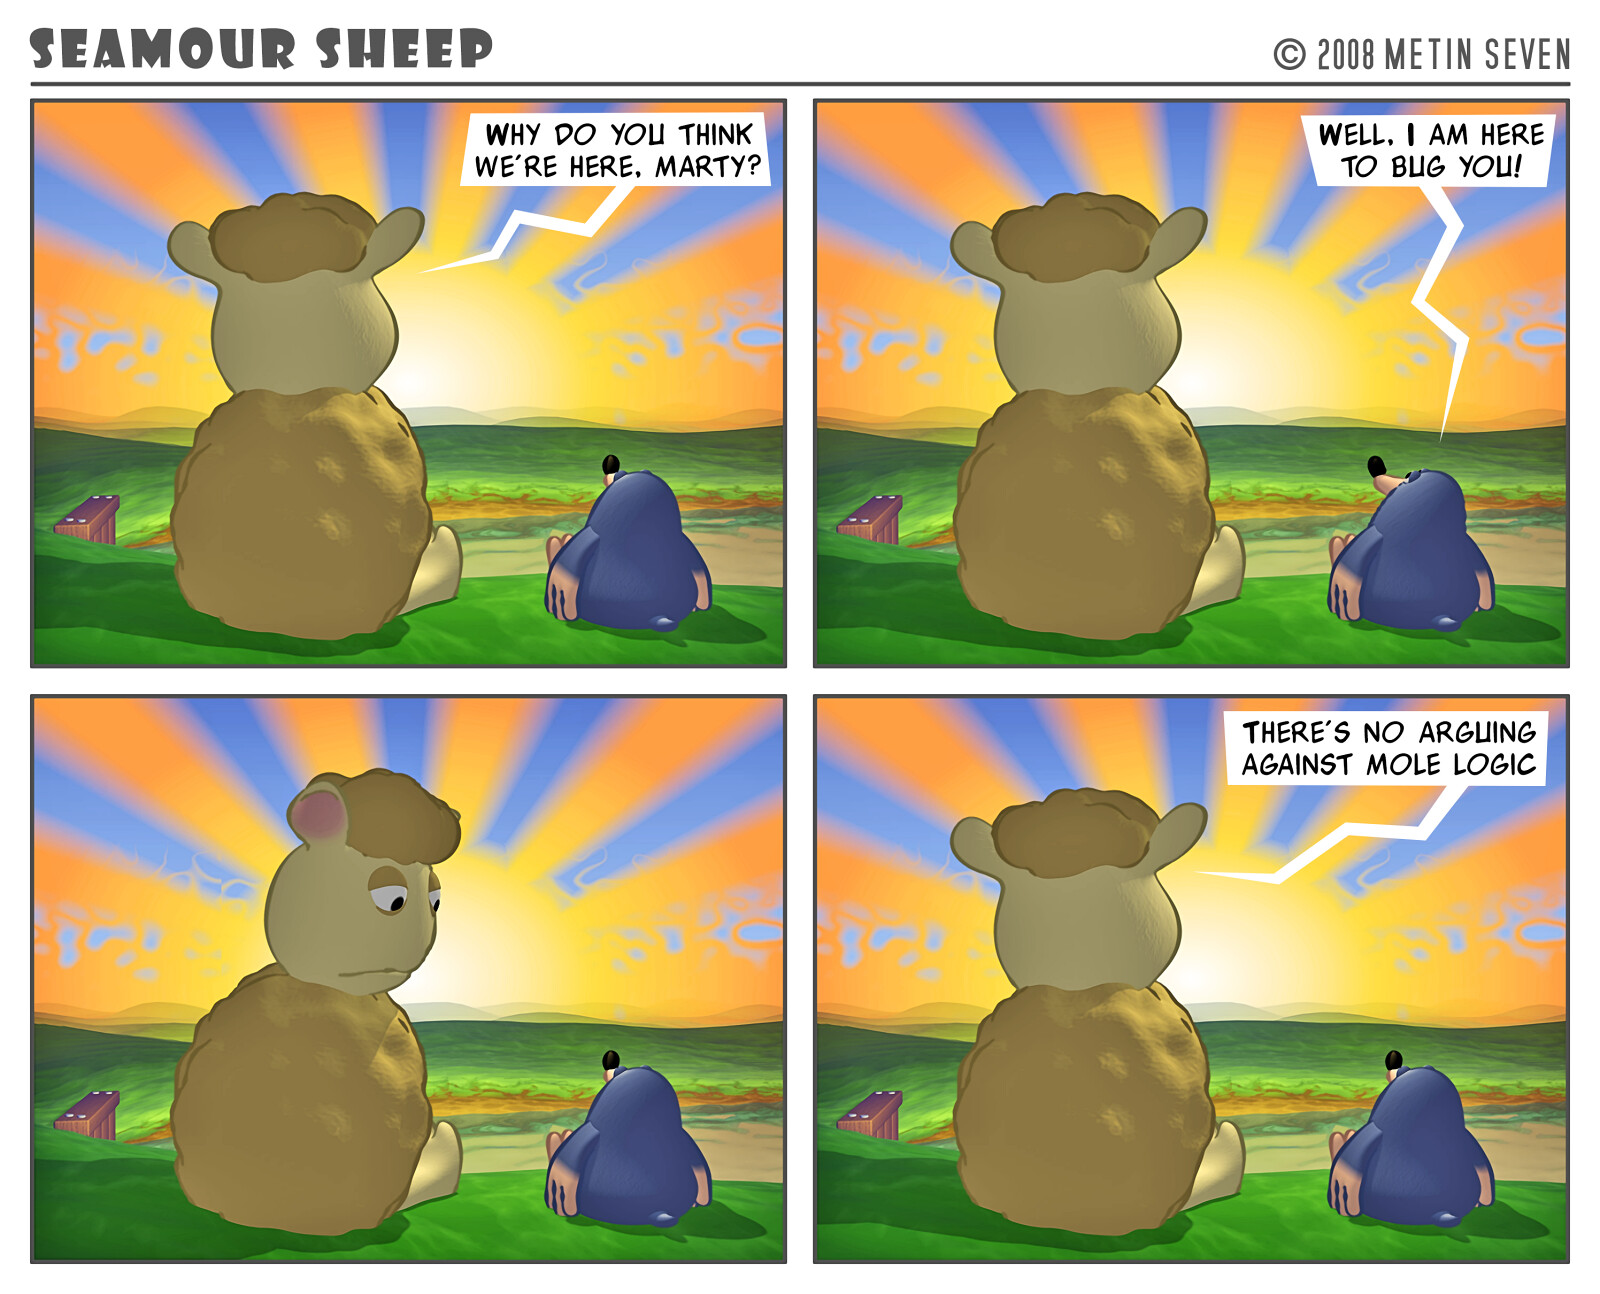 Seamour Sheep and Marty Mole comic strip episode: Existentialism